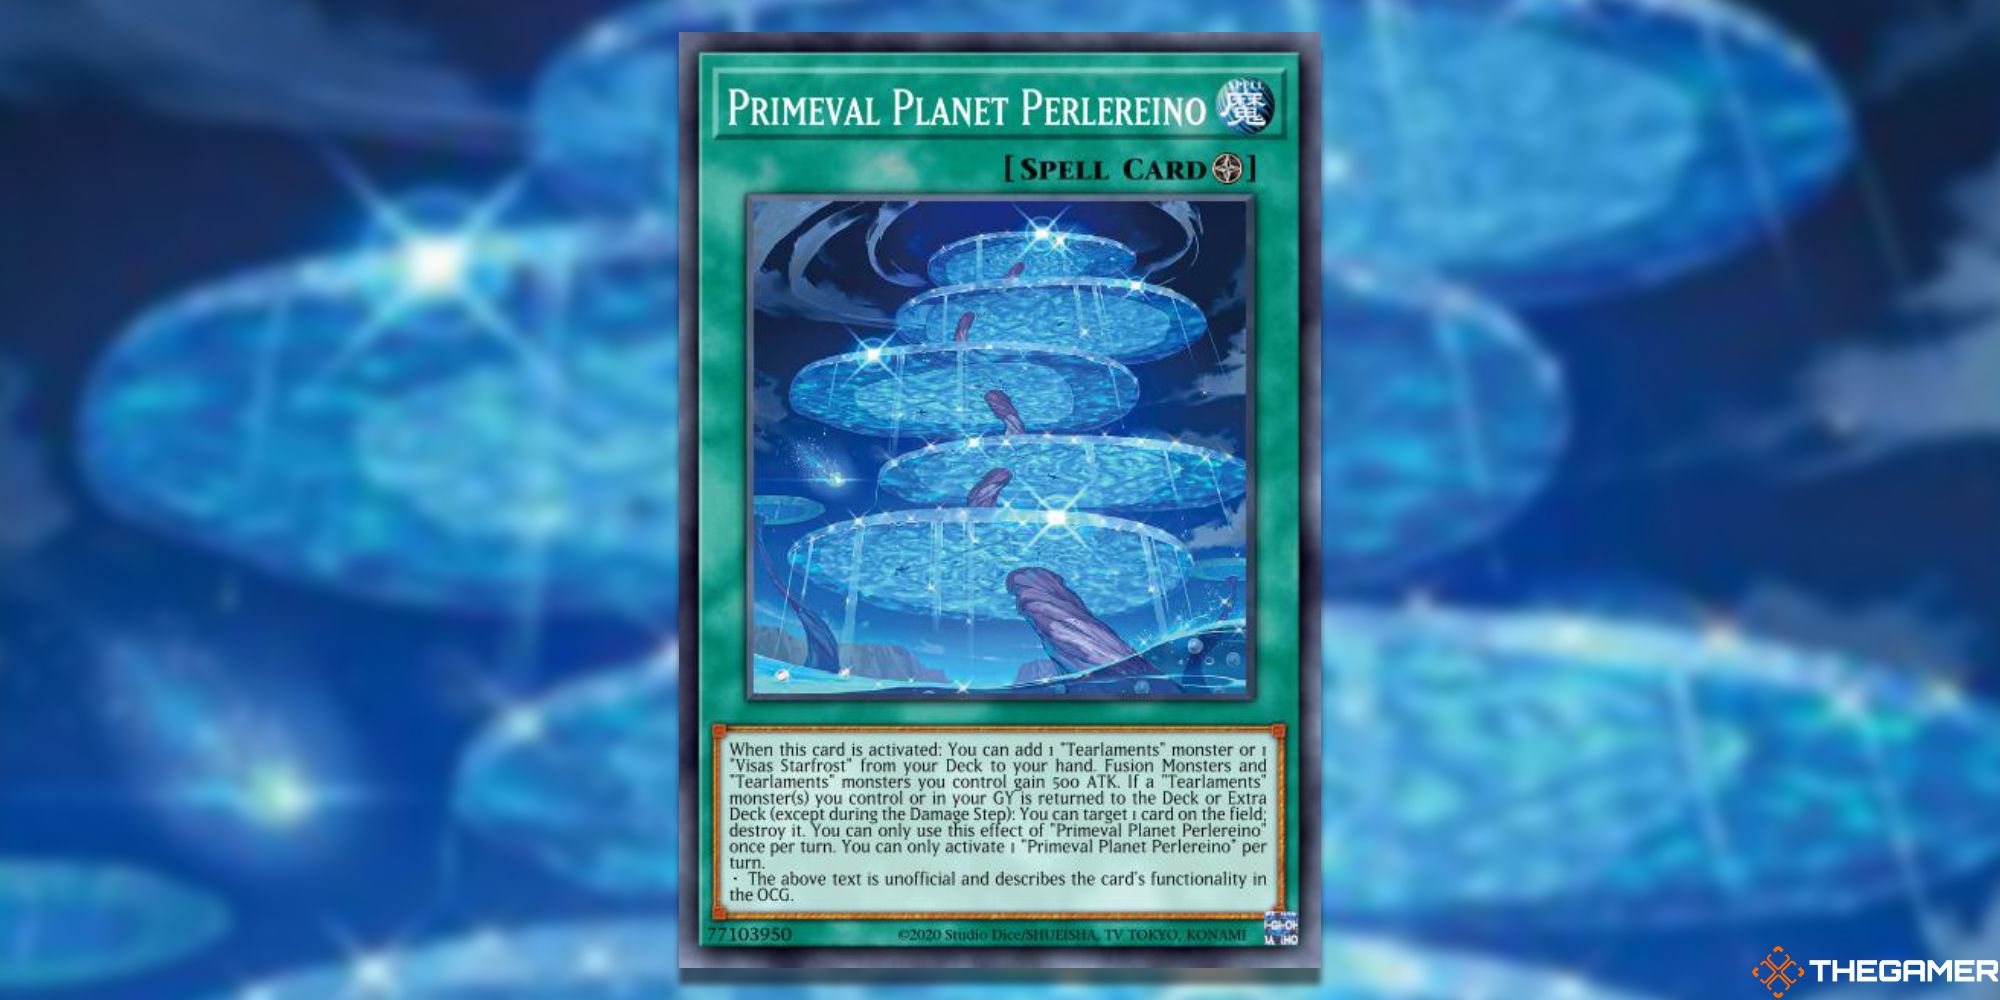 Protoplanet Perle Reino full card with Yu-Gi-Oh Gauss Blur!master duel